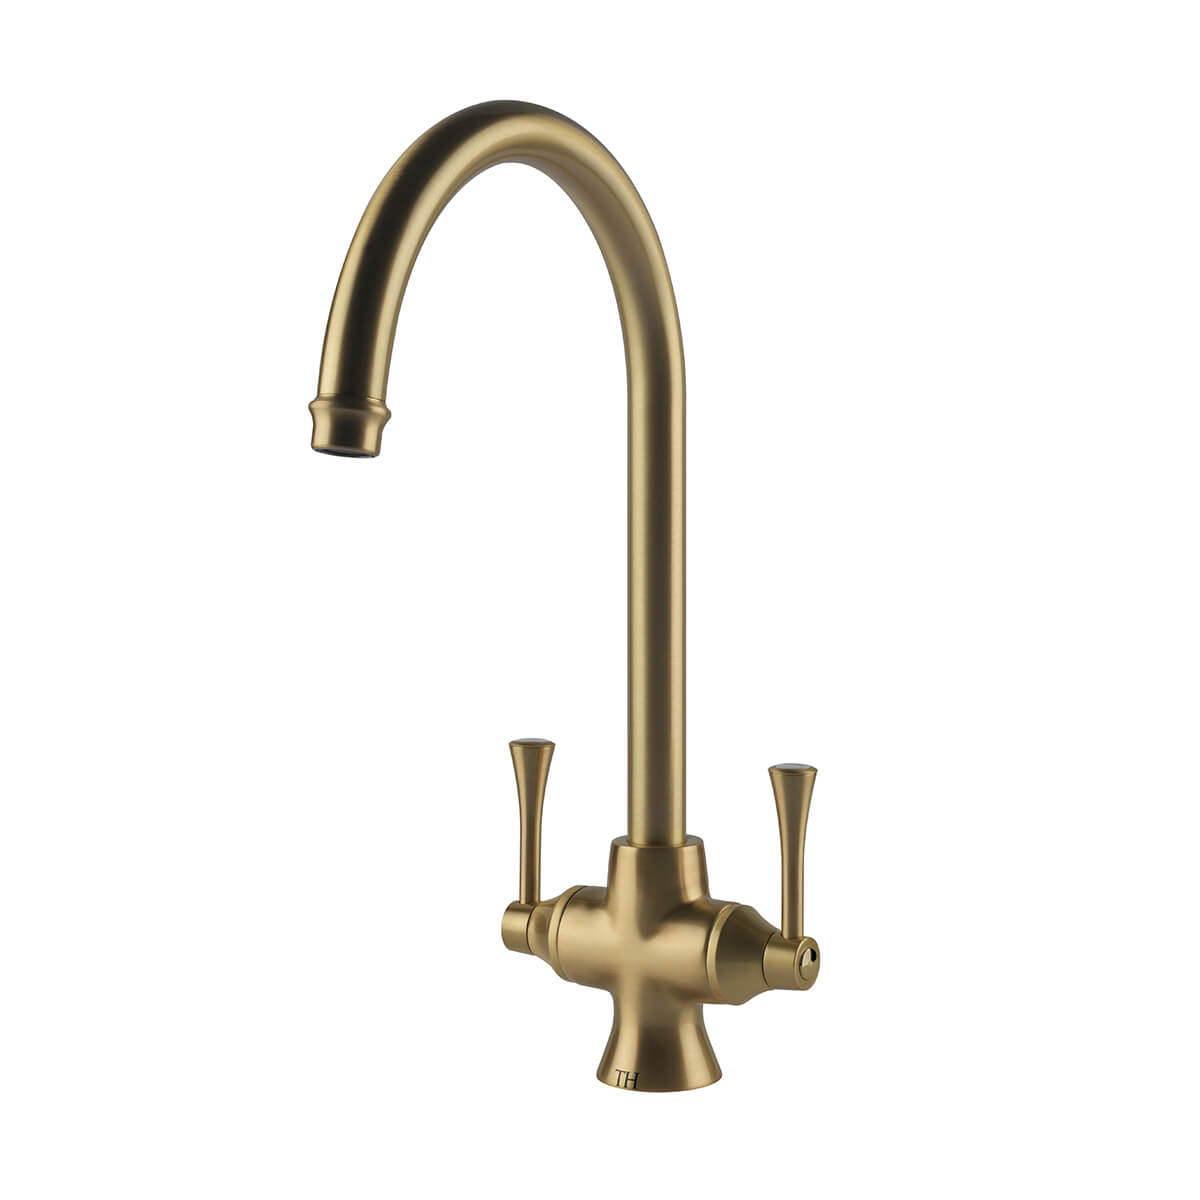 TURNER HASTINGS GOSFORD DOUBLE SINK MIXER 390MM BRUSHED BRASS